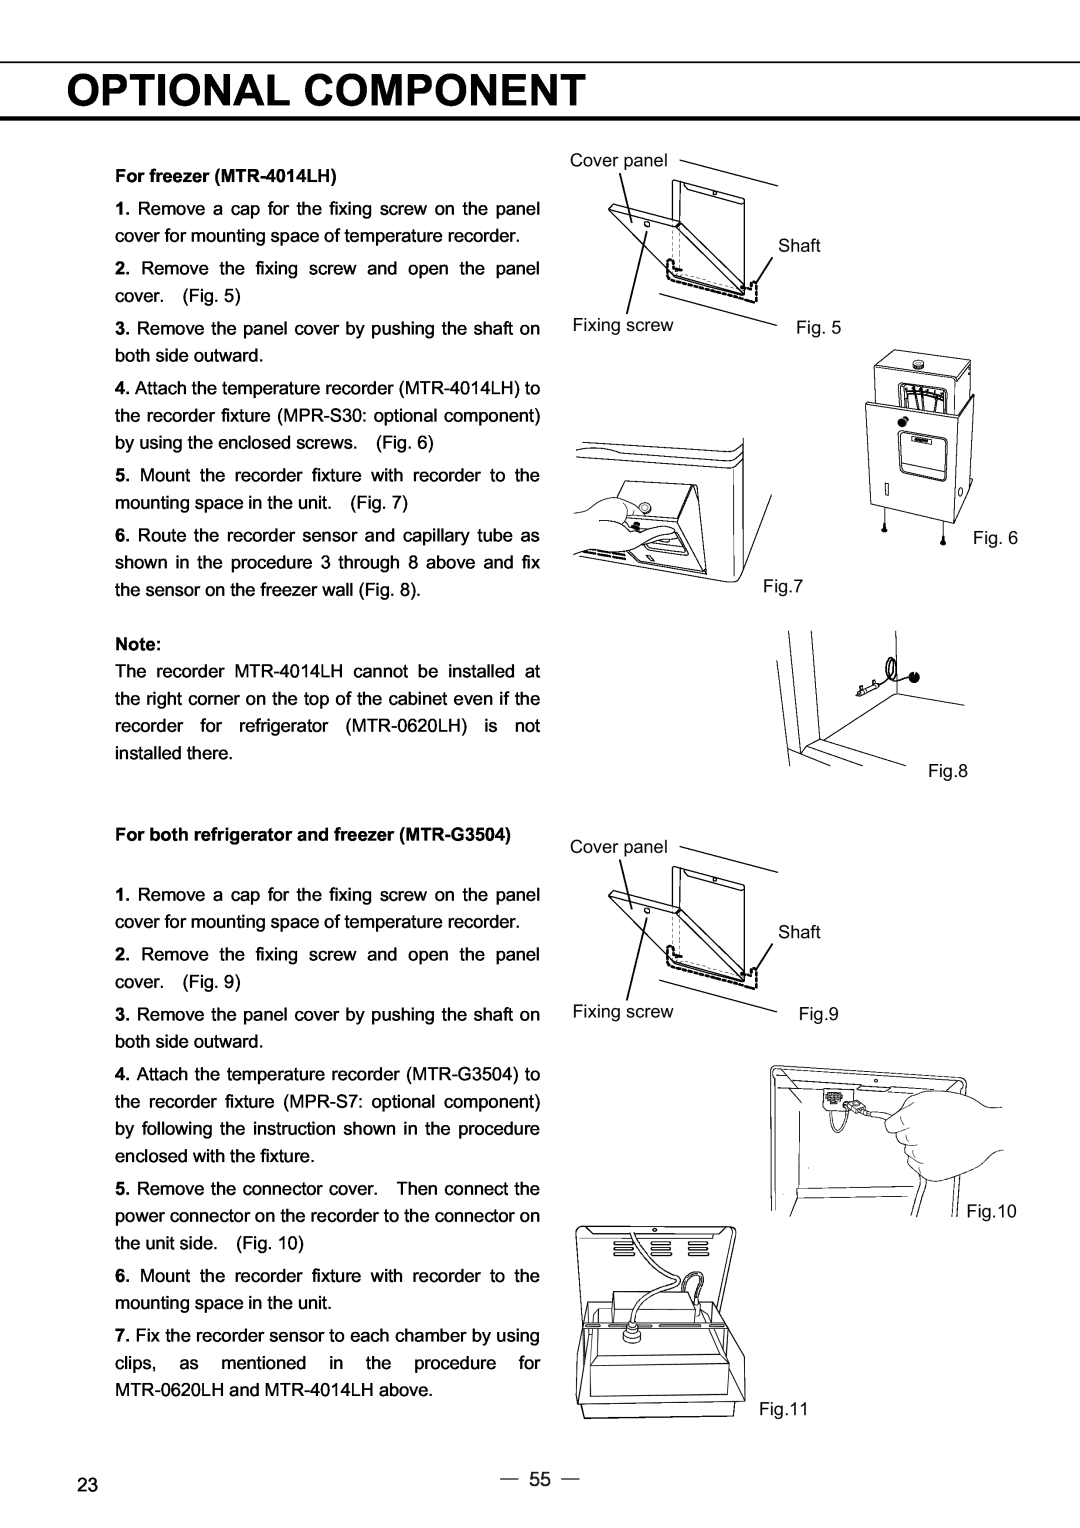 Sanyo MPR-414FS instruction manual Optional Component, For freezer MTR-4014LH, For both refrigerator and freezer MTR-G3504 